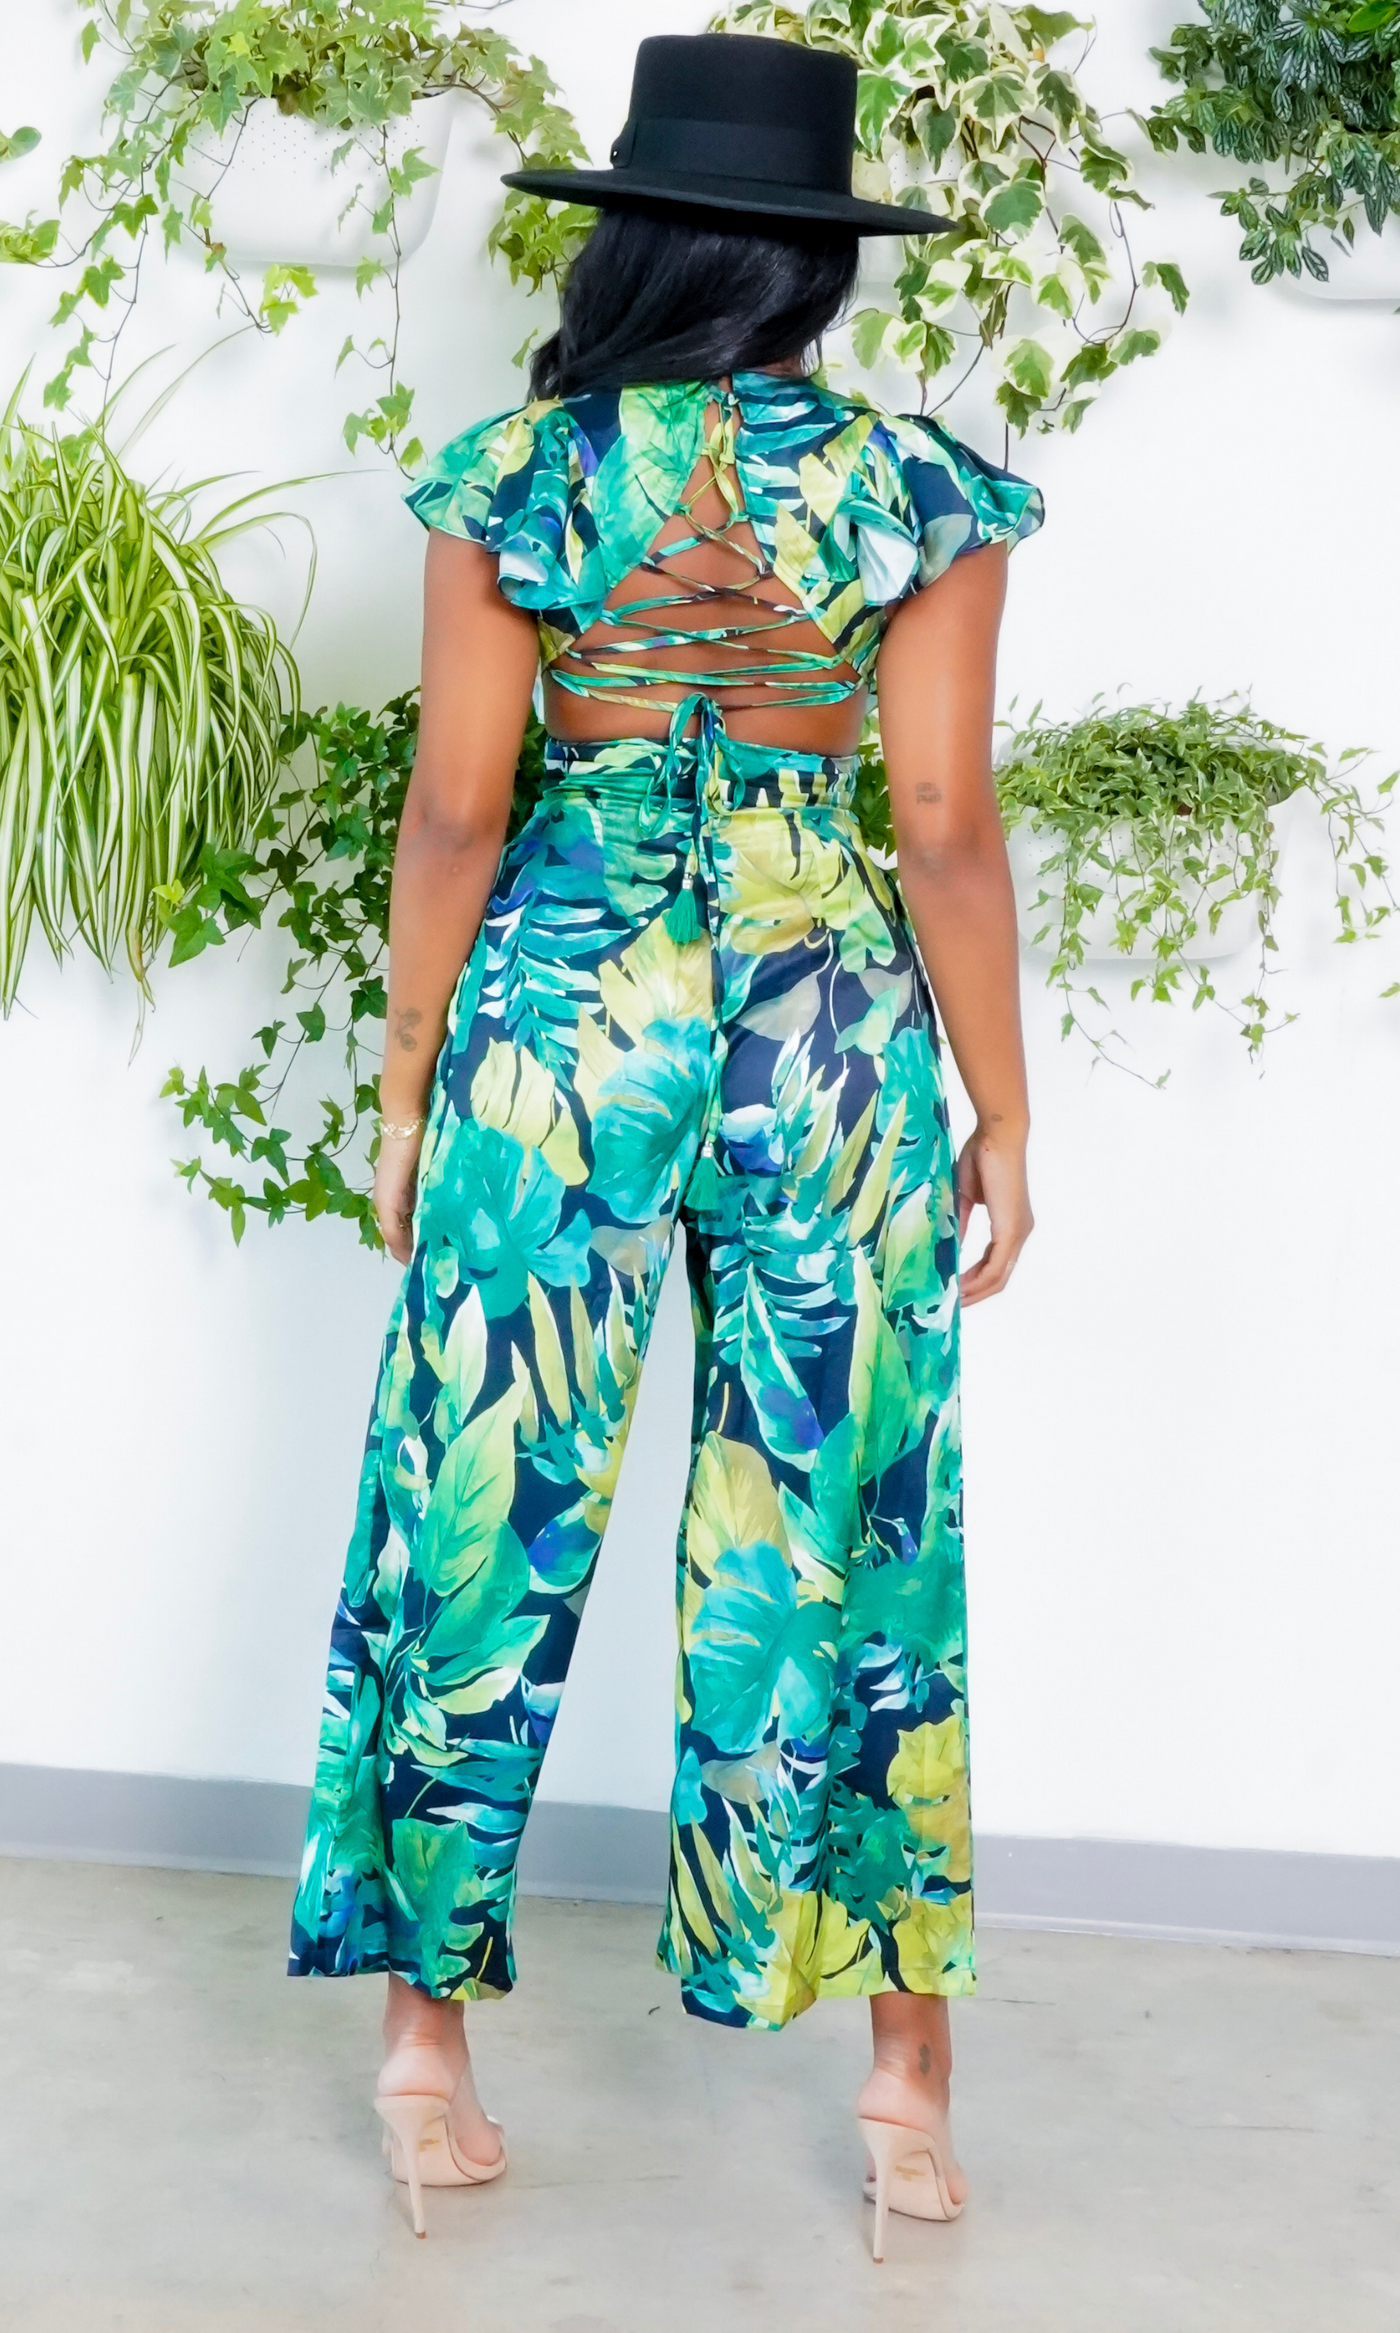 Masterpiece | Tropical Lace Back Jumpsuit FINAL SALE - Cutely Covered